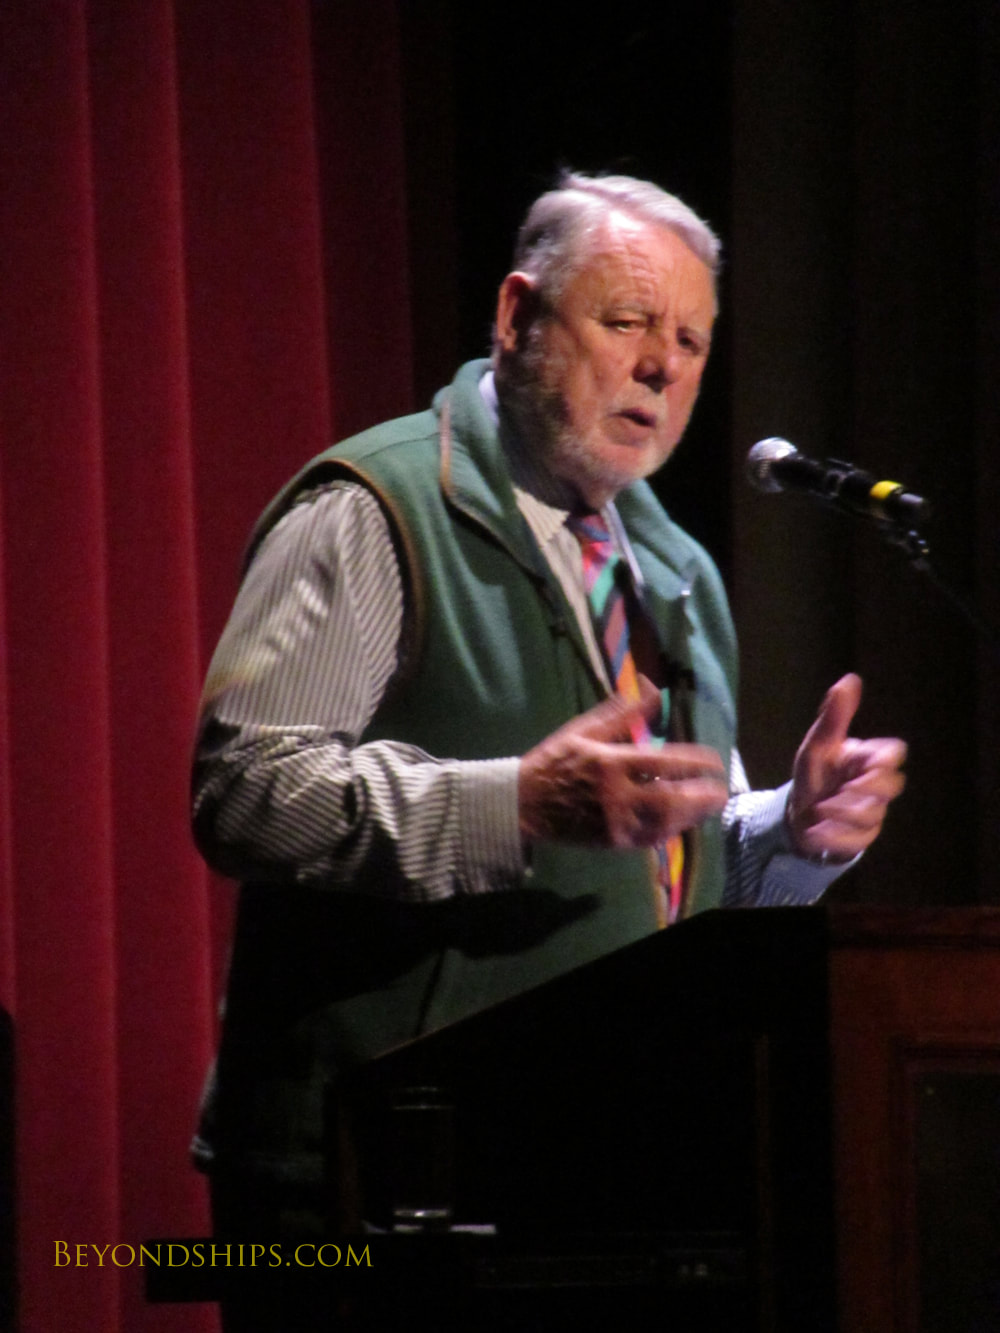 Terry Waite lecturing in Cruise ship Queen Victoria Royal Court Theatre